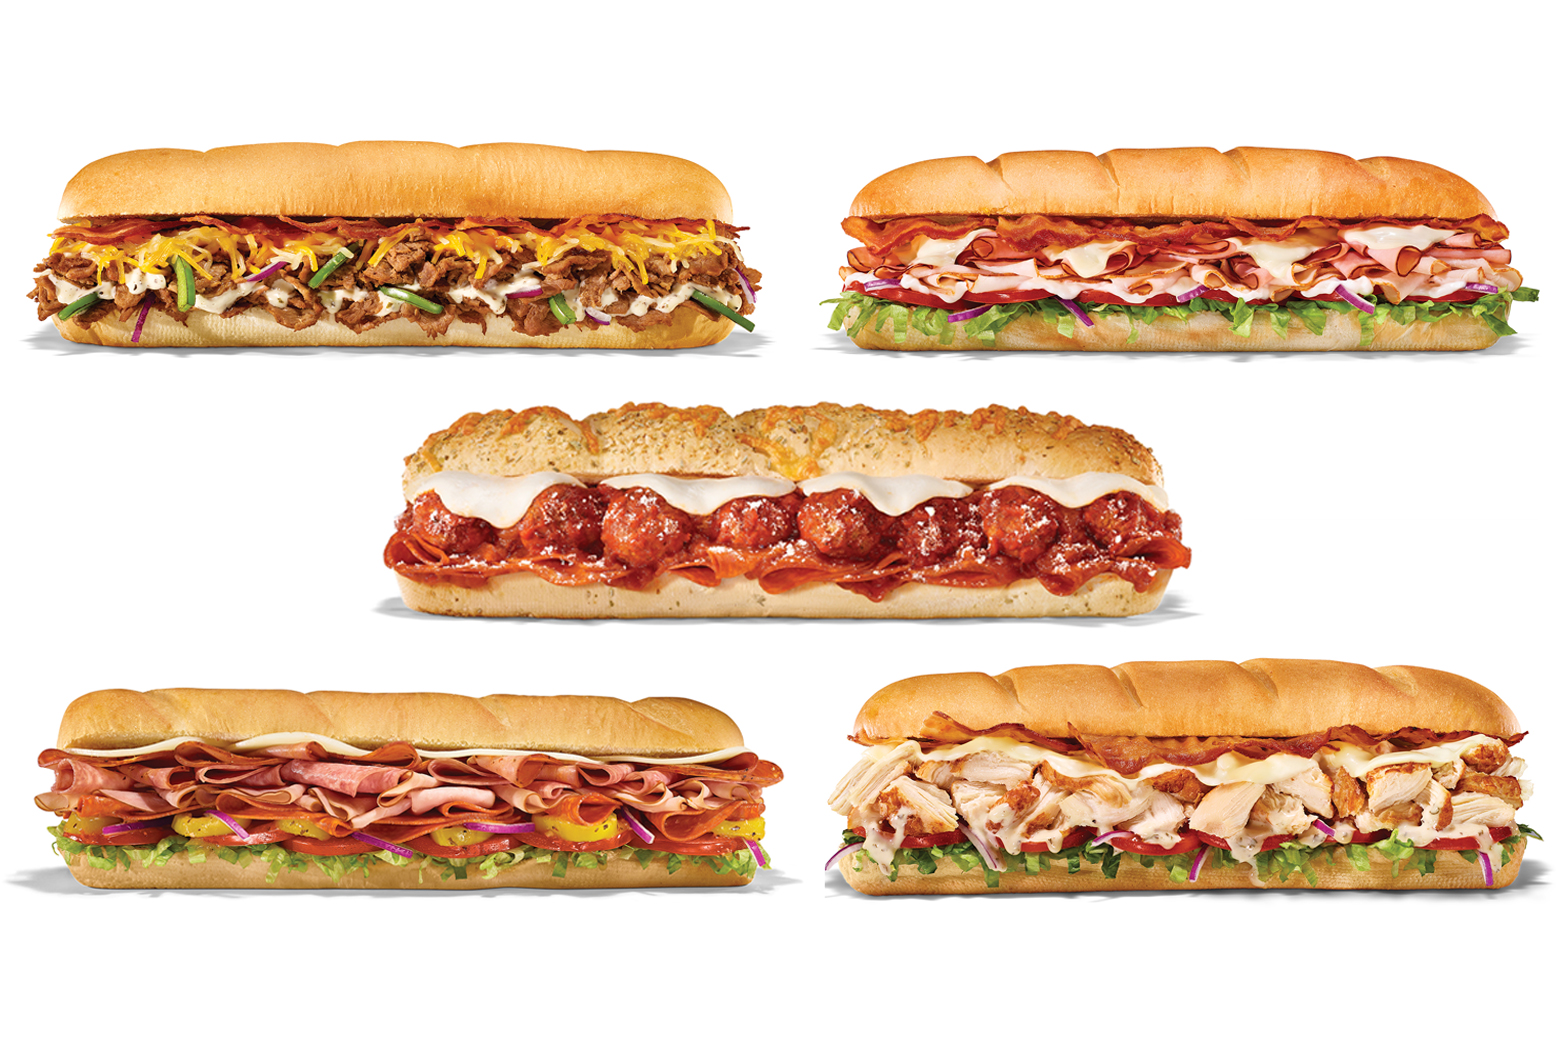 Subway Is Giving Out 1 Million Free Sandwiches to Celebrate Their